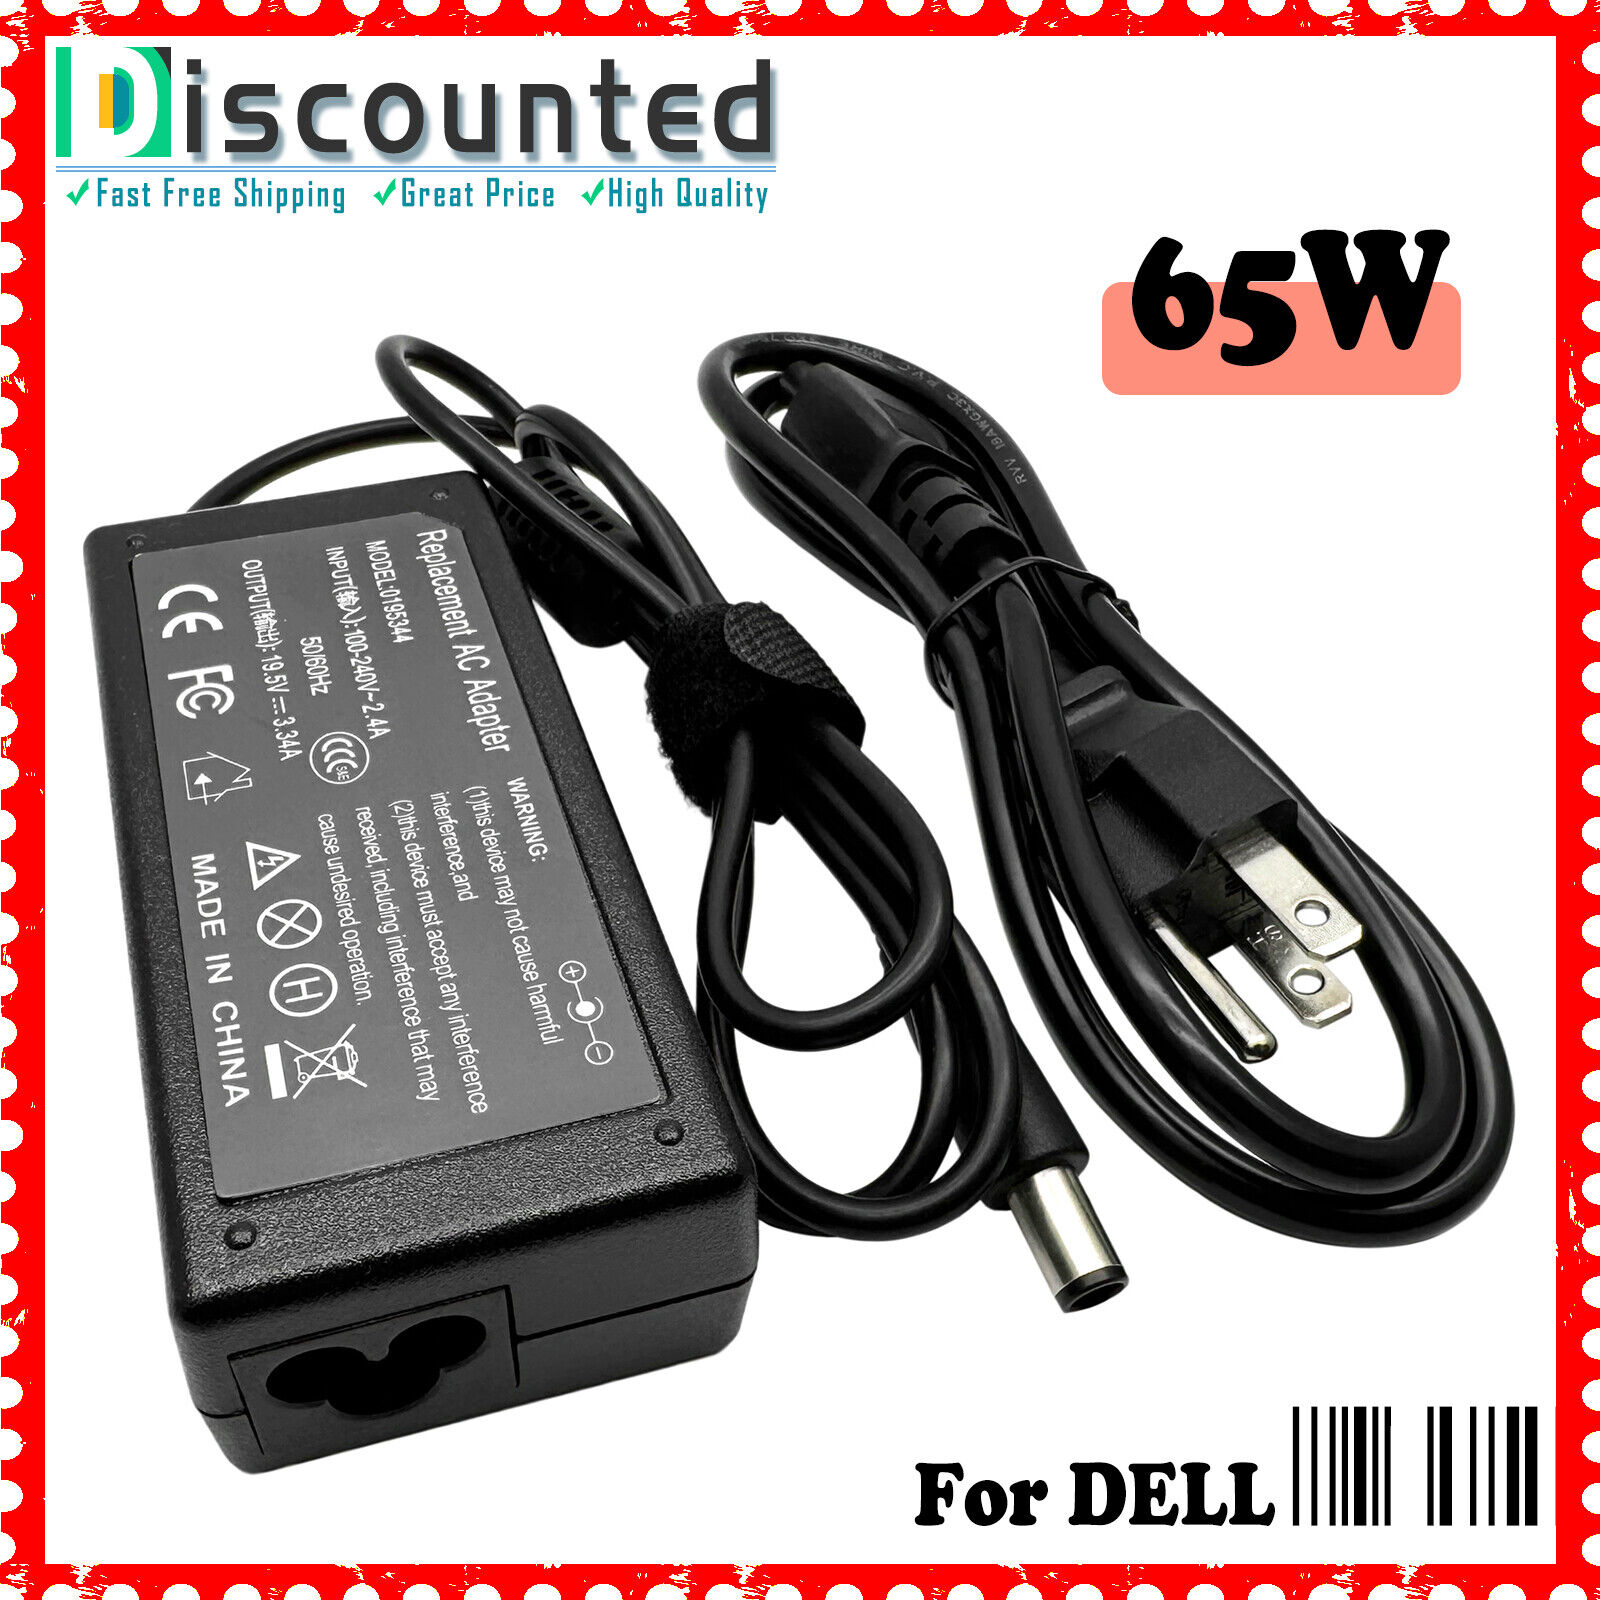 For Dell 6TFFF JNKWD 3F1CN LA65NM130 HA65NM130 Laptop AC Power Adapter Charger